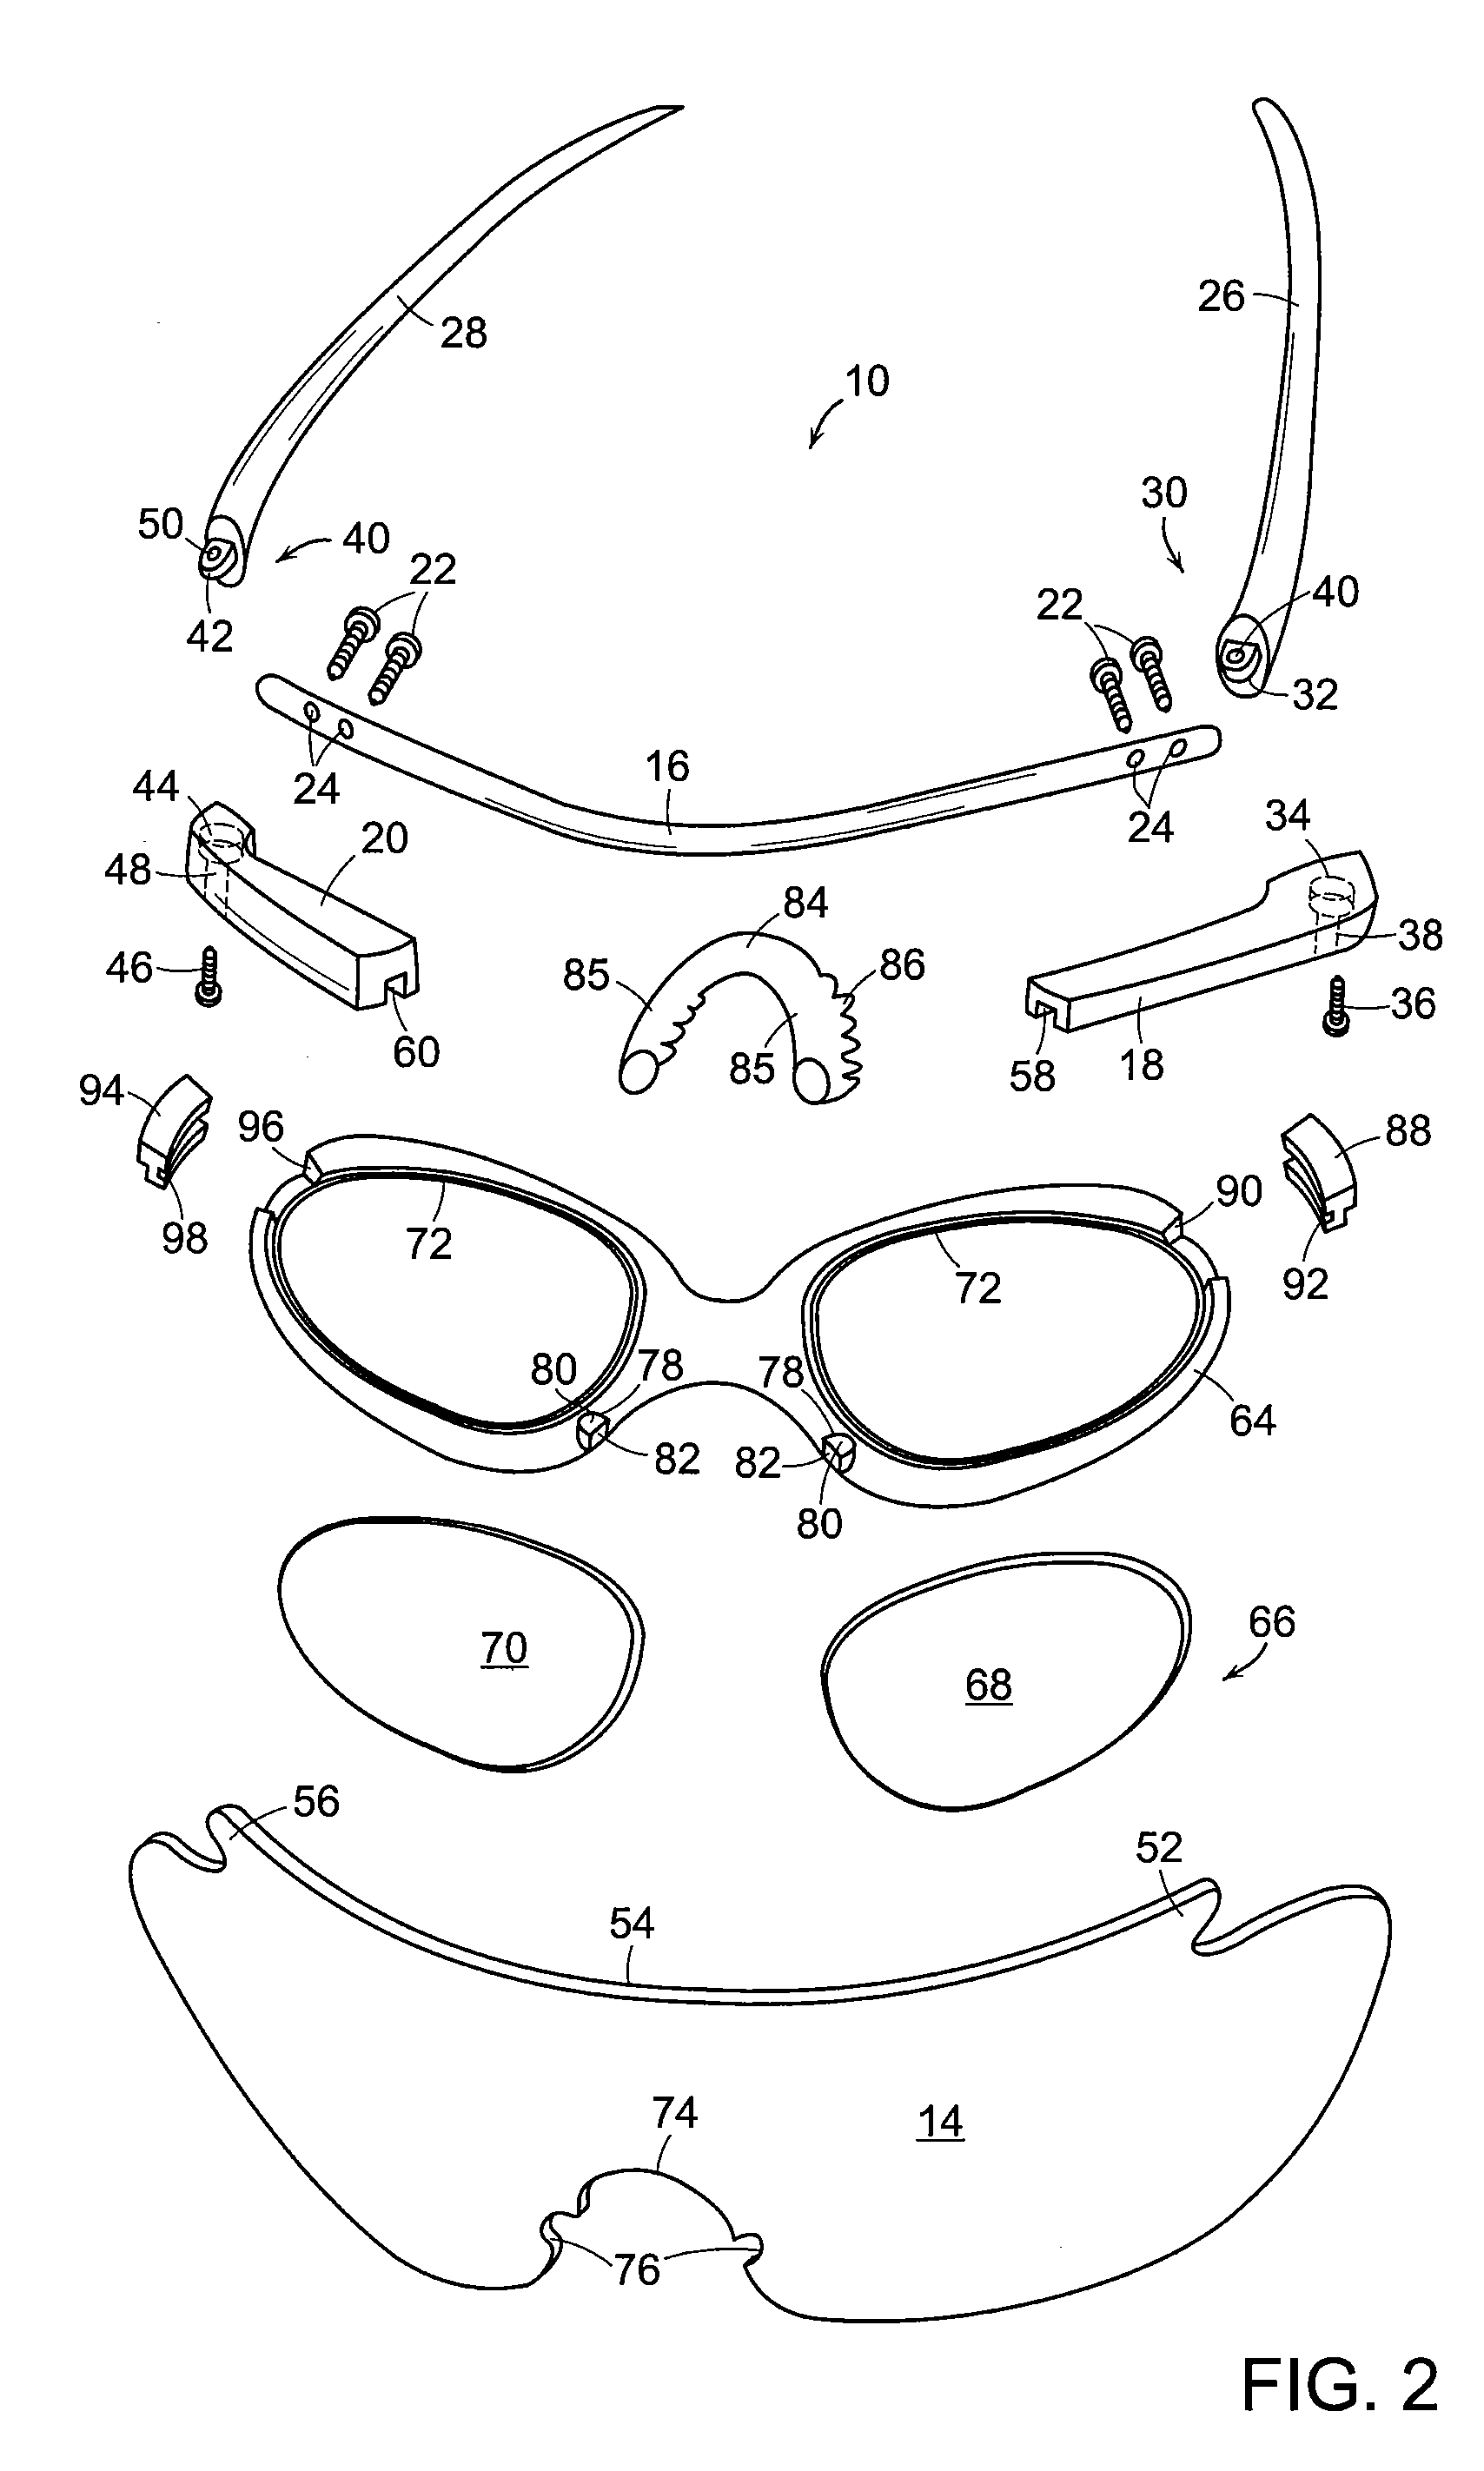 Eyewear with clip-on frame and lens